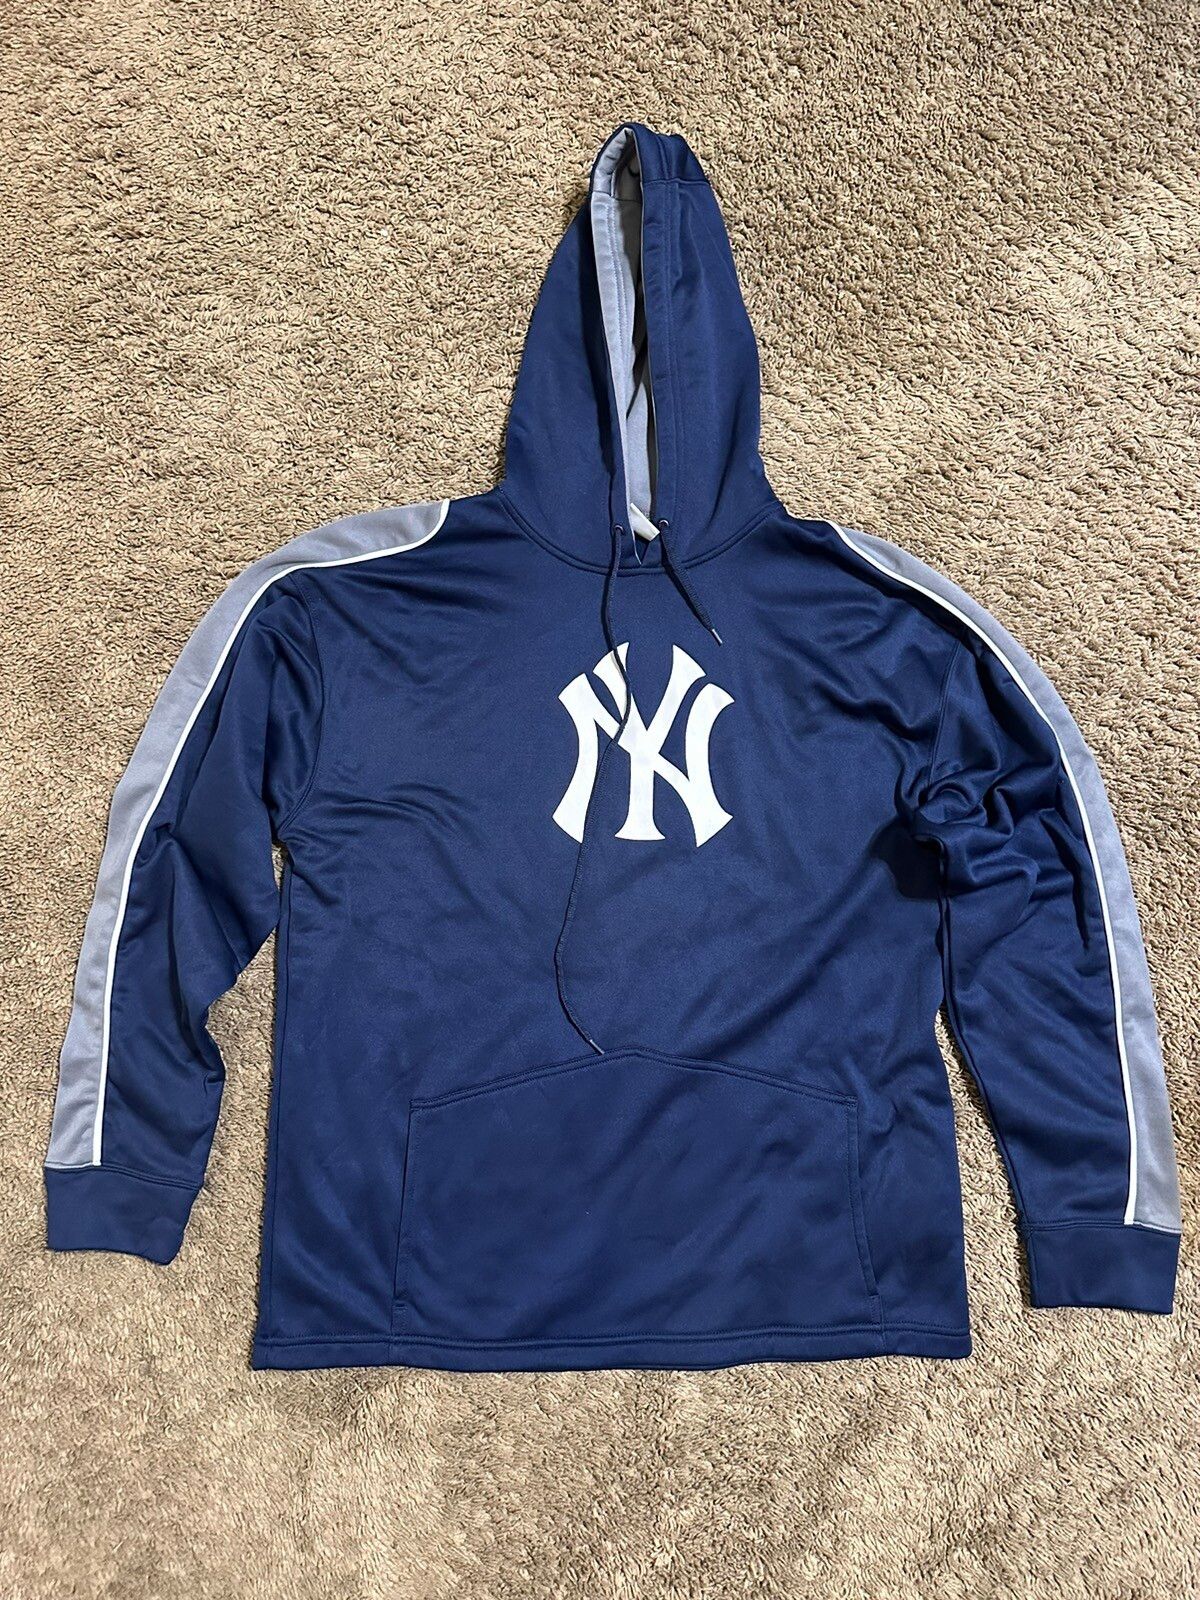 Nike Vintage MLB New York Yankees “face” hoodie 90s size large Size US L / EU 52-54 / 3 - 1 Preview